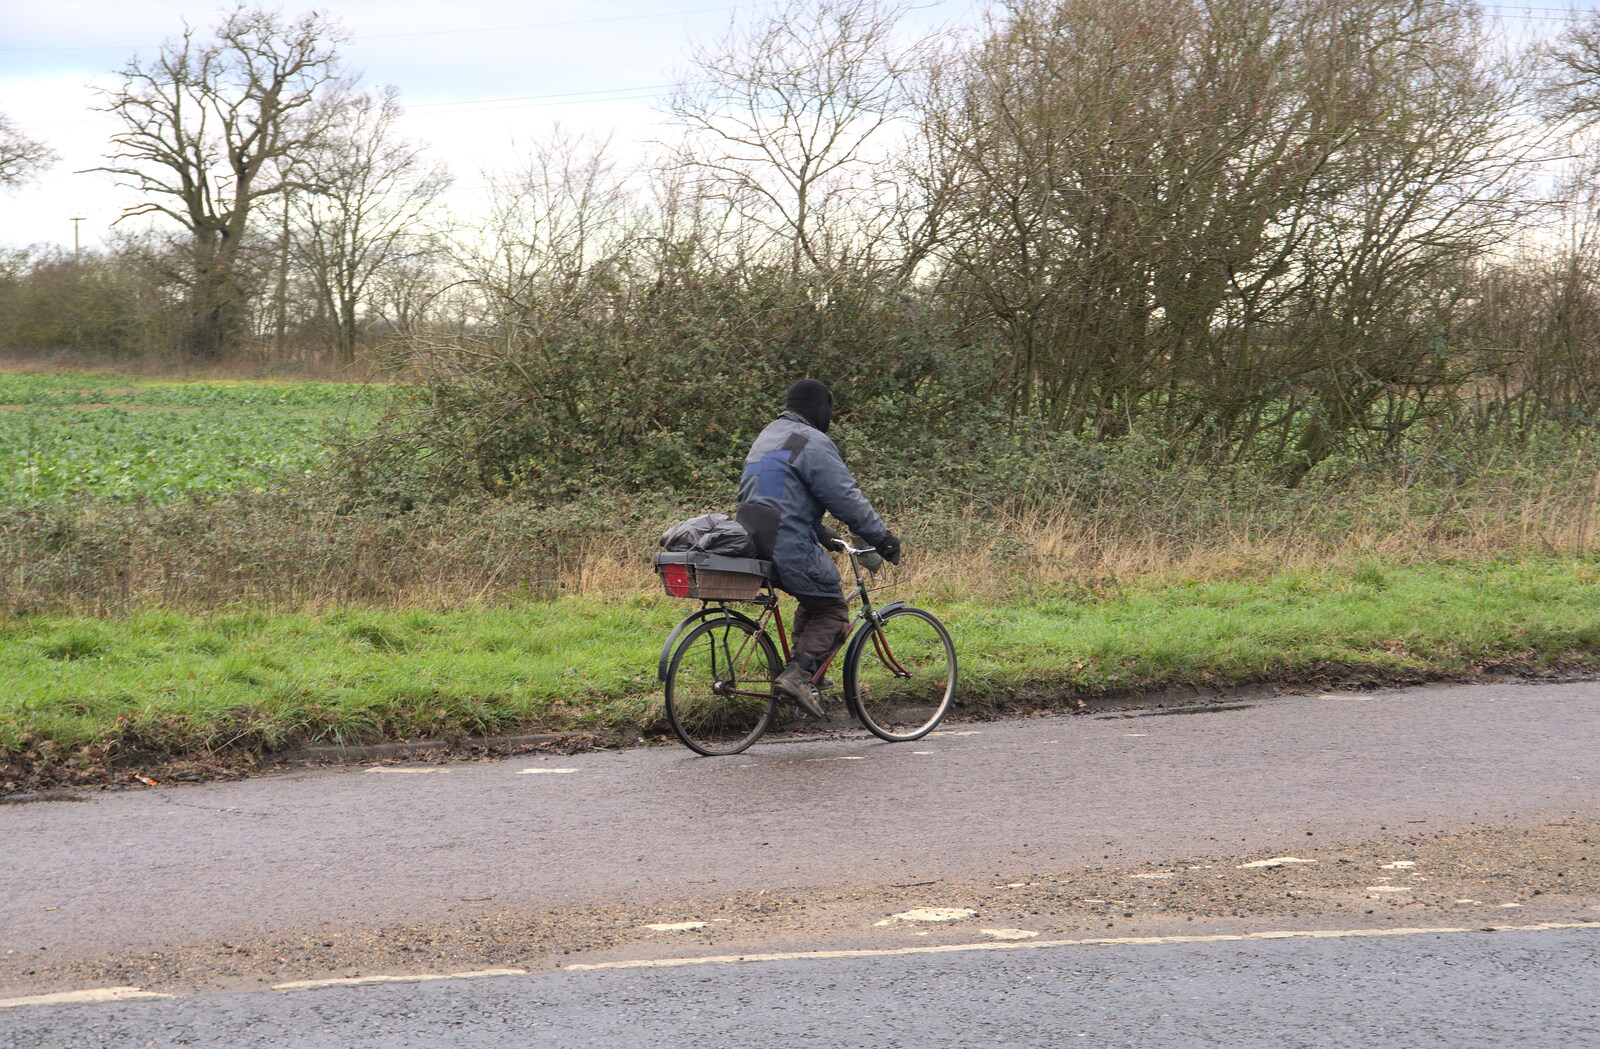 A dude on an ancient bike cycles off to Diss from A Virtual New Year's Eve, Brome, Suffolk - 31st December 2020